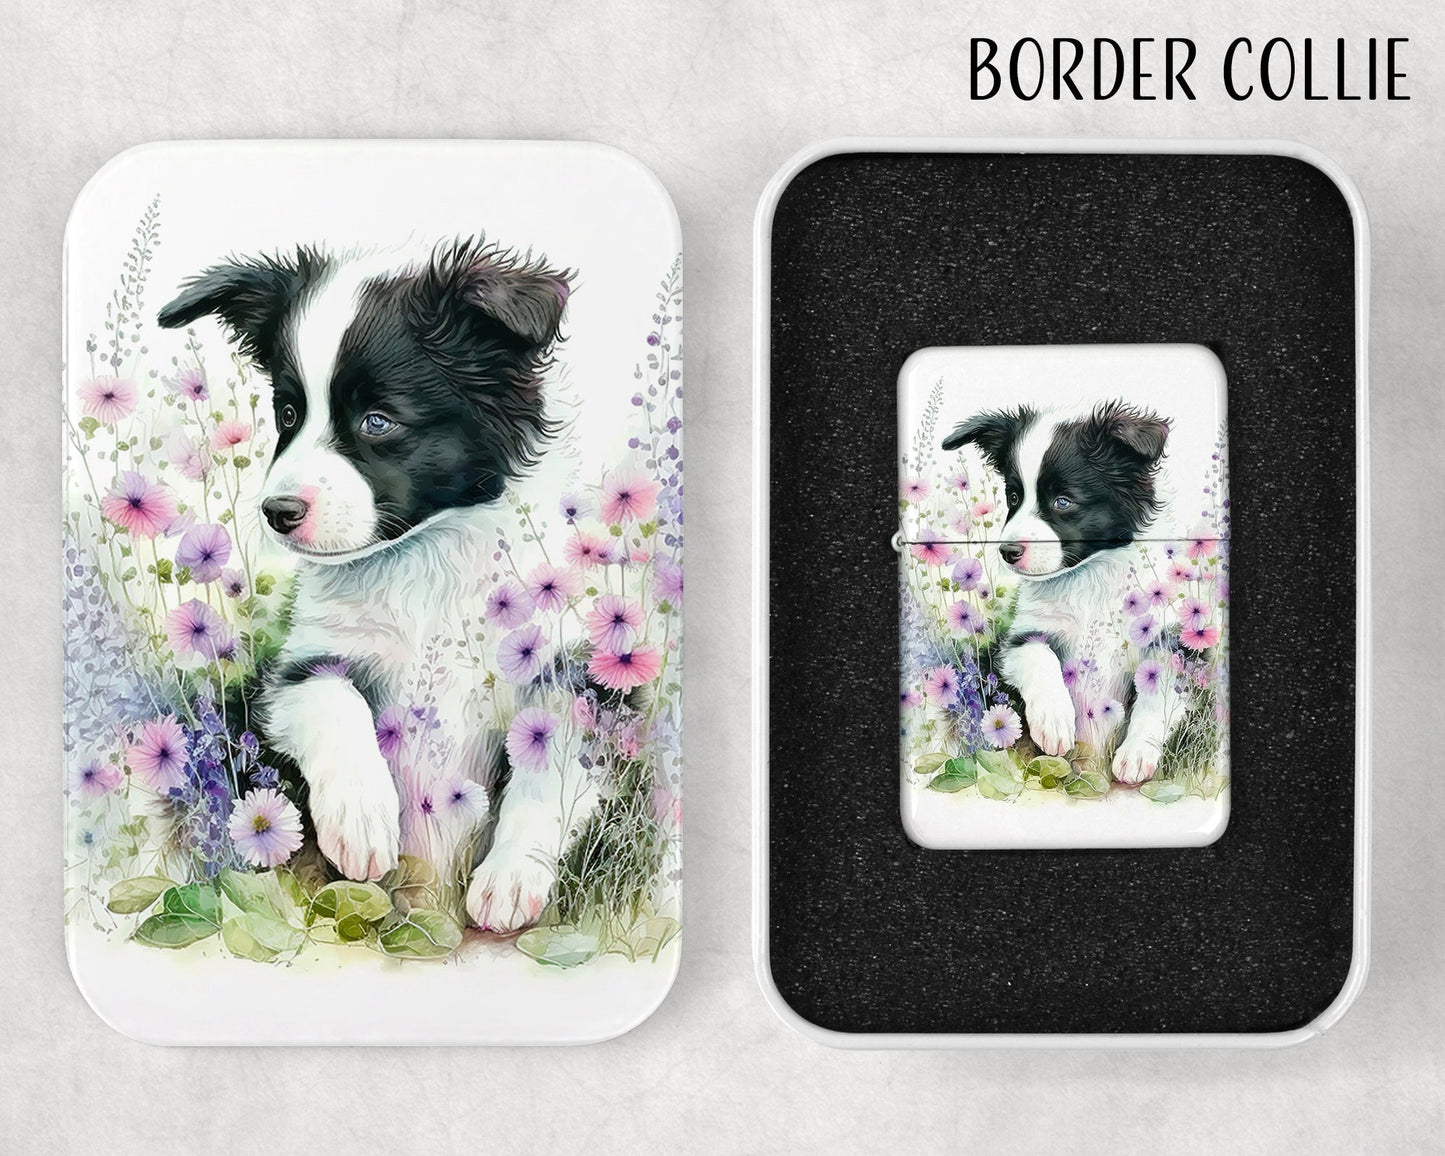 Cute Puppies Art Flip Top Lighter and Matching Gift Tin - Group 1 - 8 Design Choices